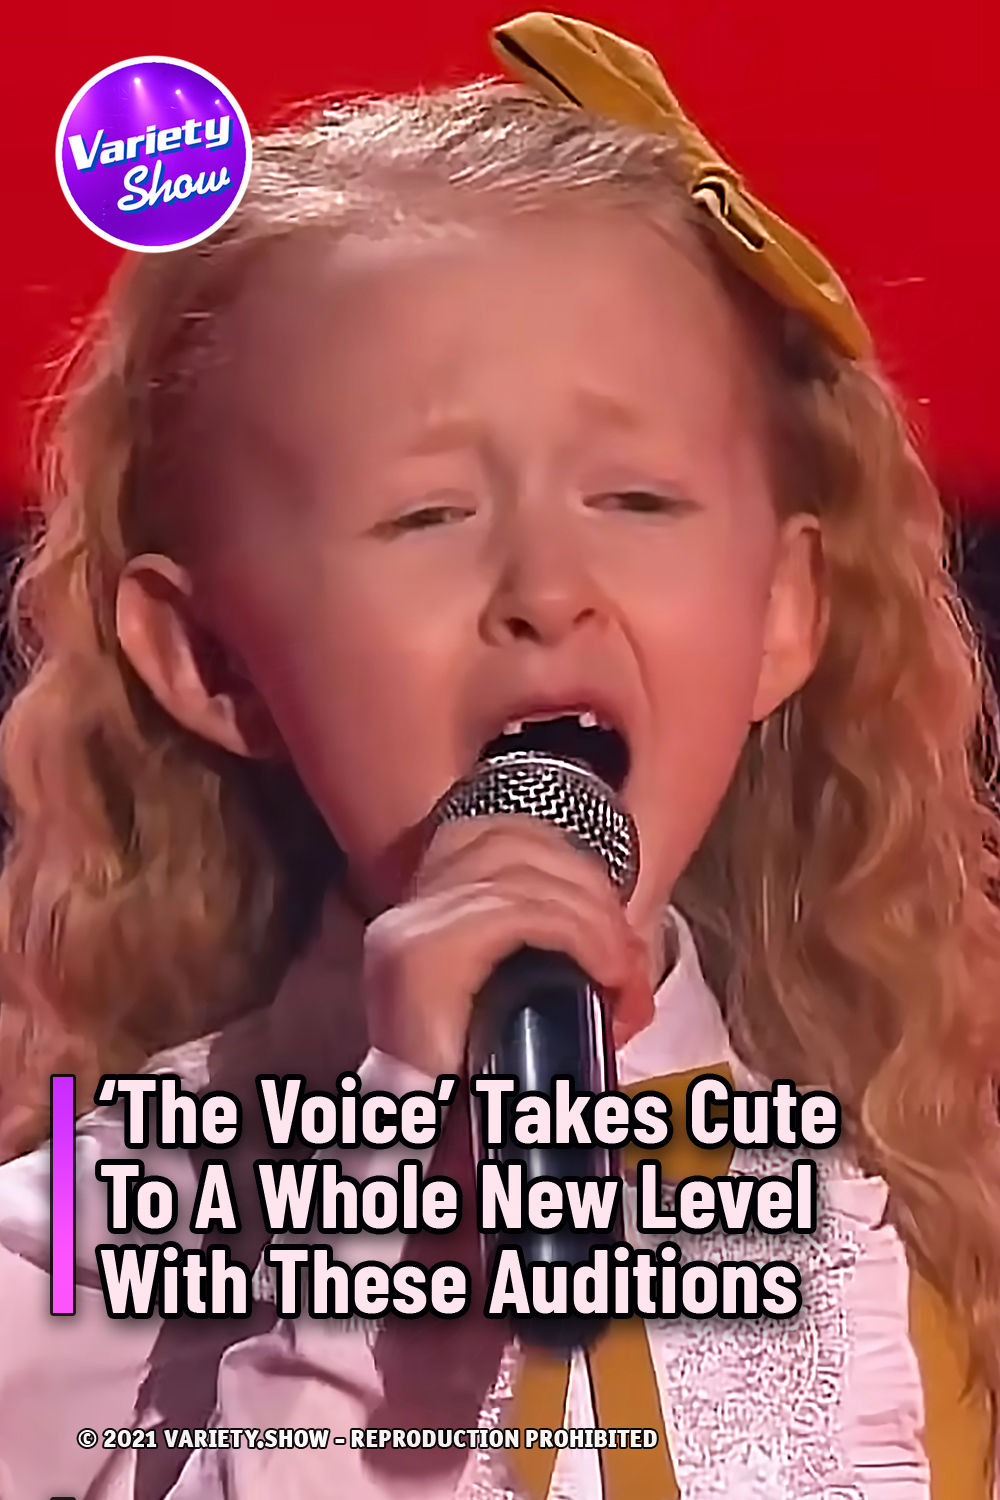 ‘The Voice’ Takes Cute To A Whole New Level With These Auditions